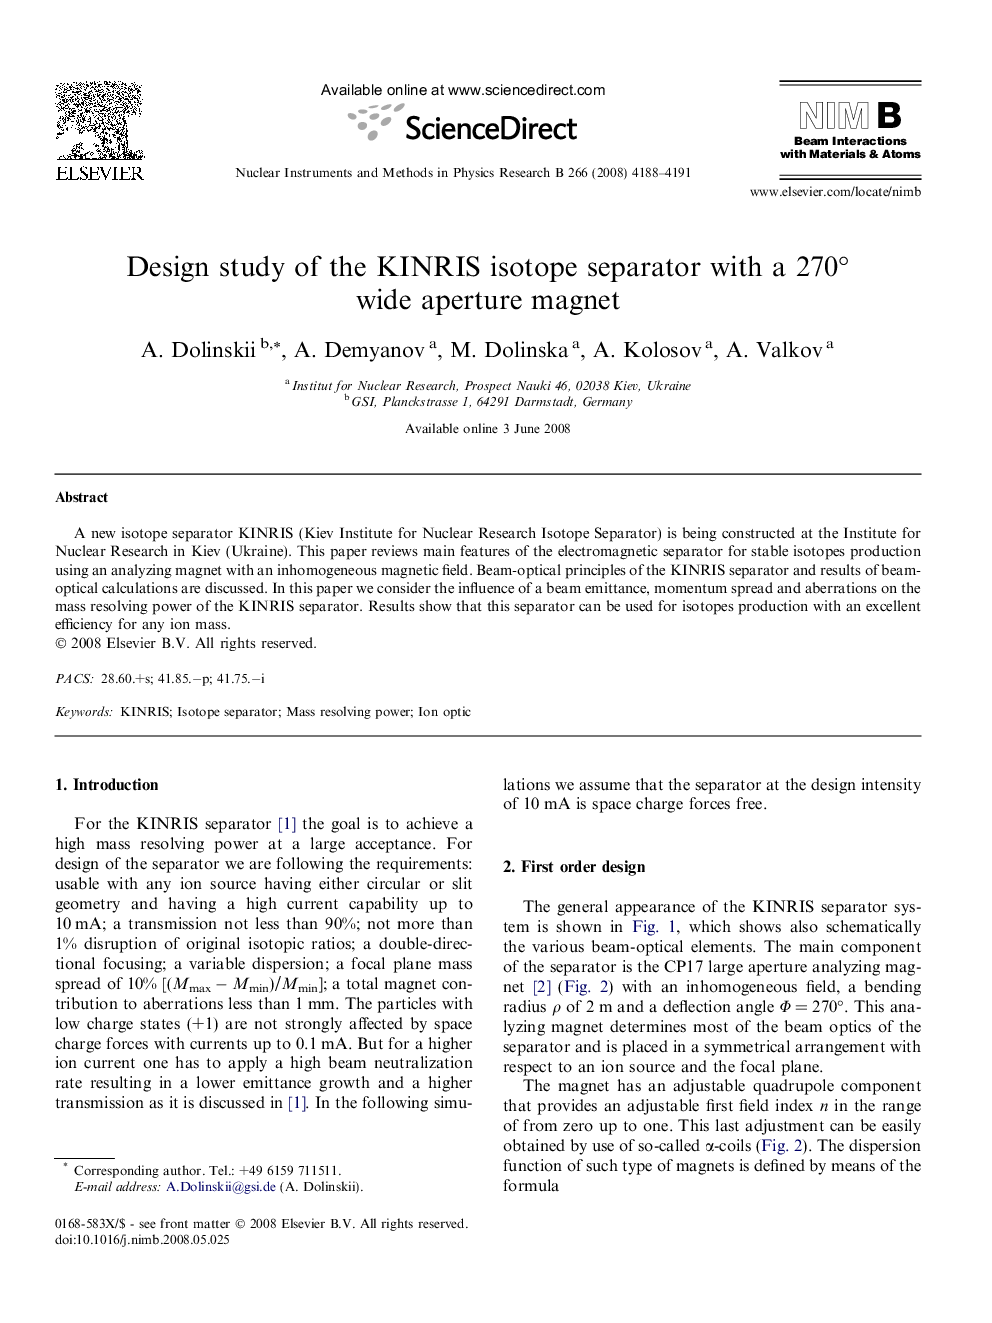 Design study of the KINRIS isotope separator with a 270Â° wide aperture magnet